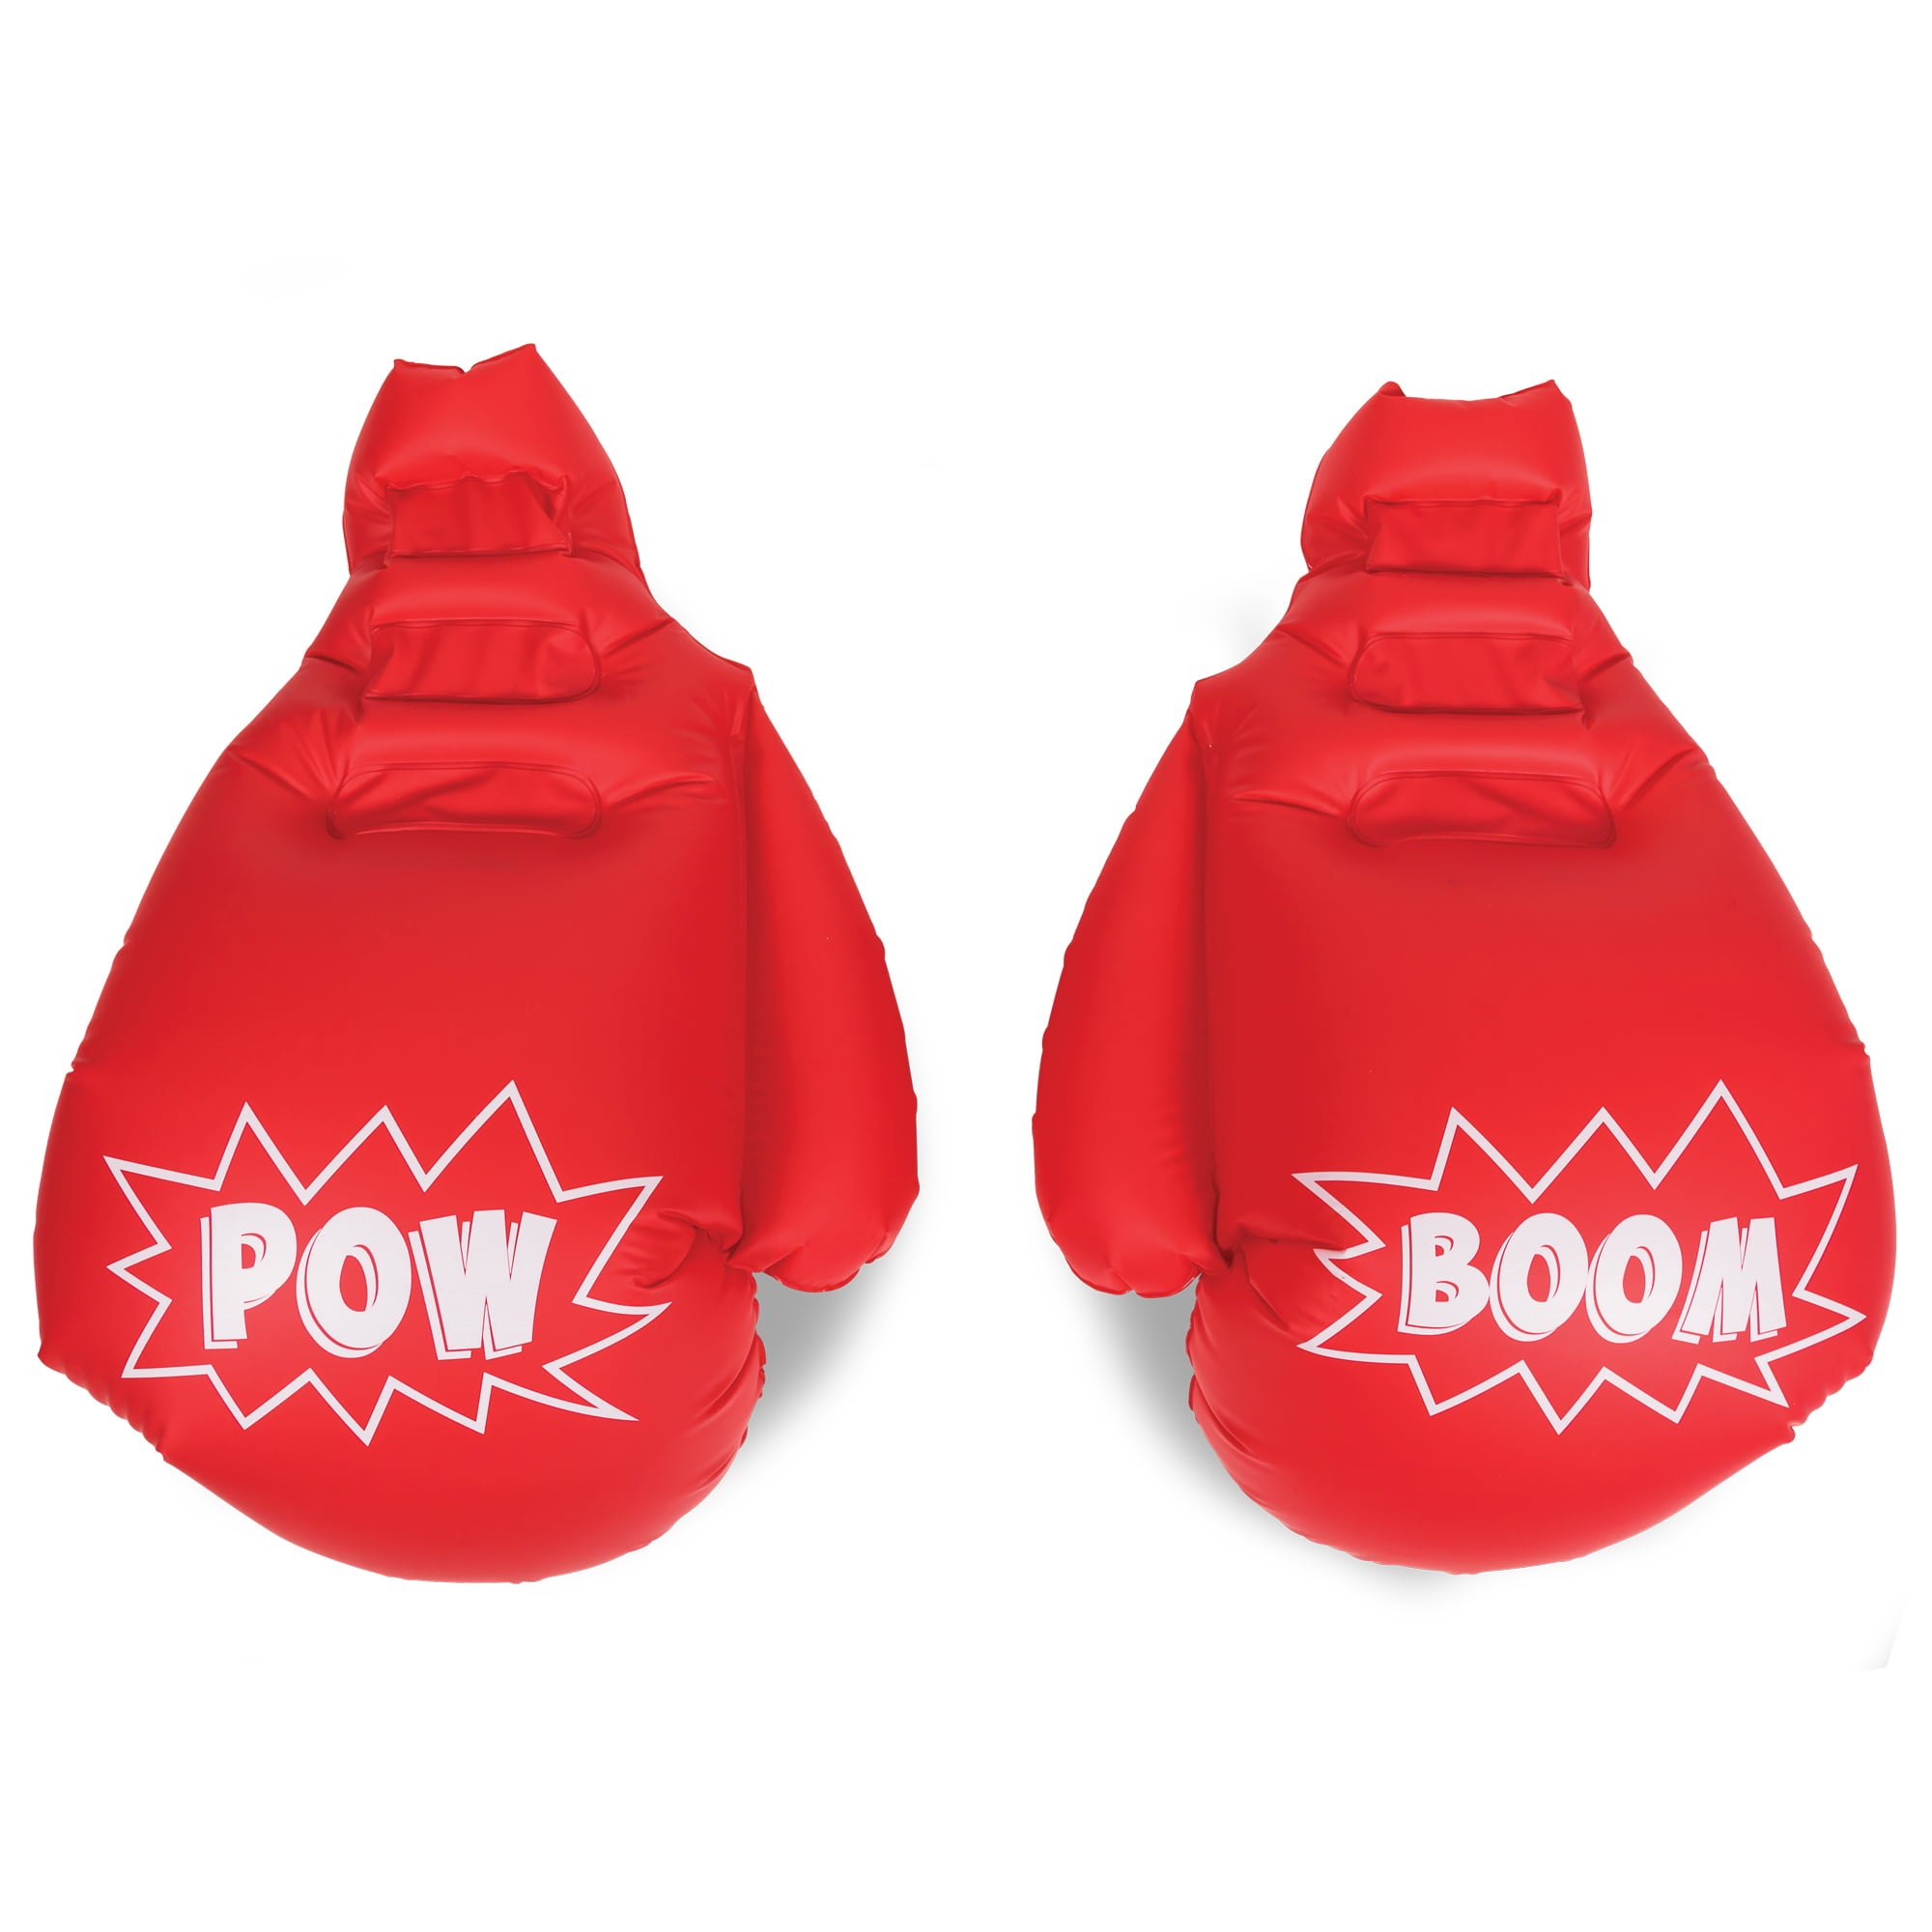 EastPoint Big Boppers Giant Inflatable Boxing Gloves, 1 Pair, 26 in. Red (1.5 lbs)